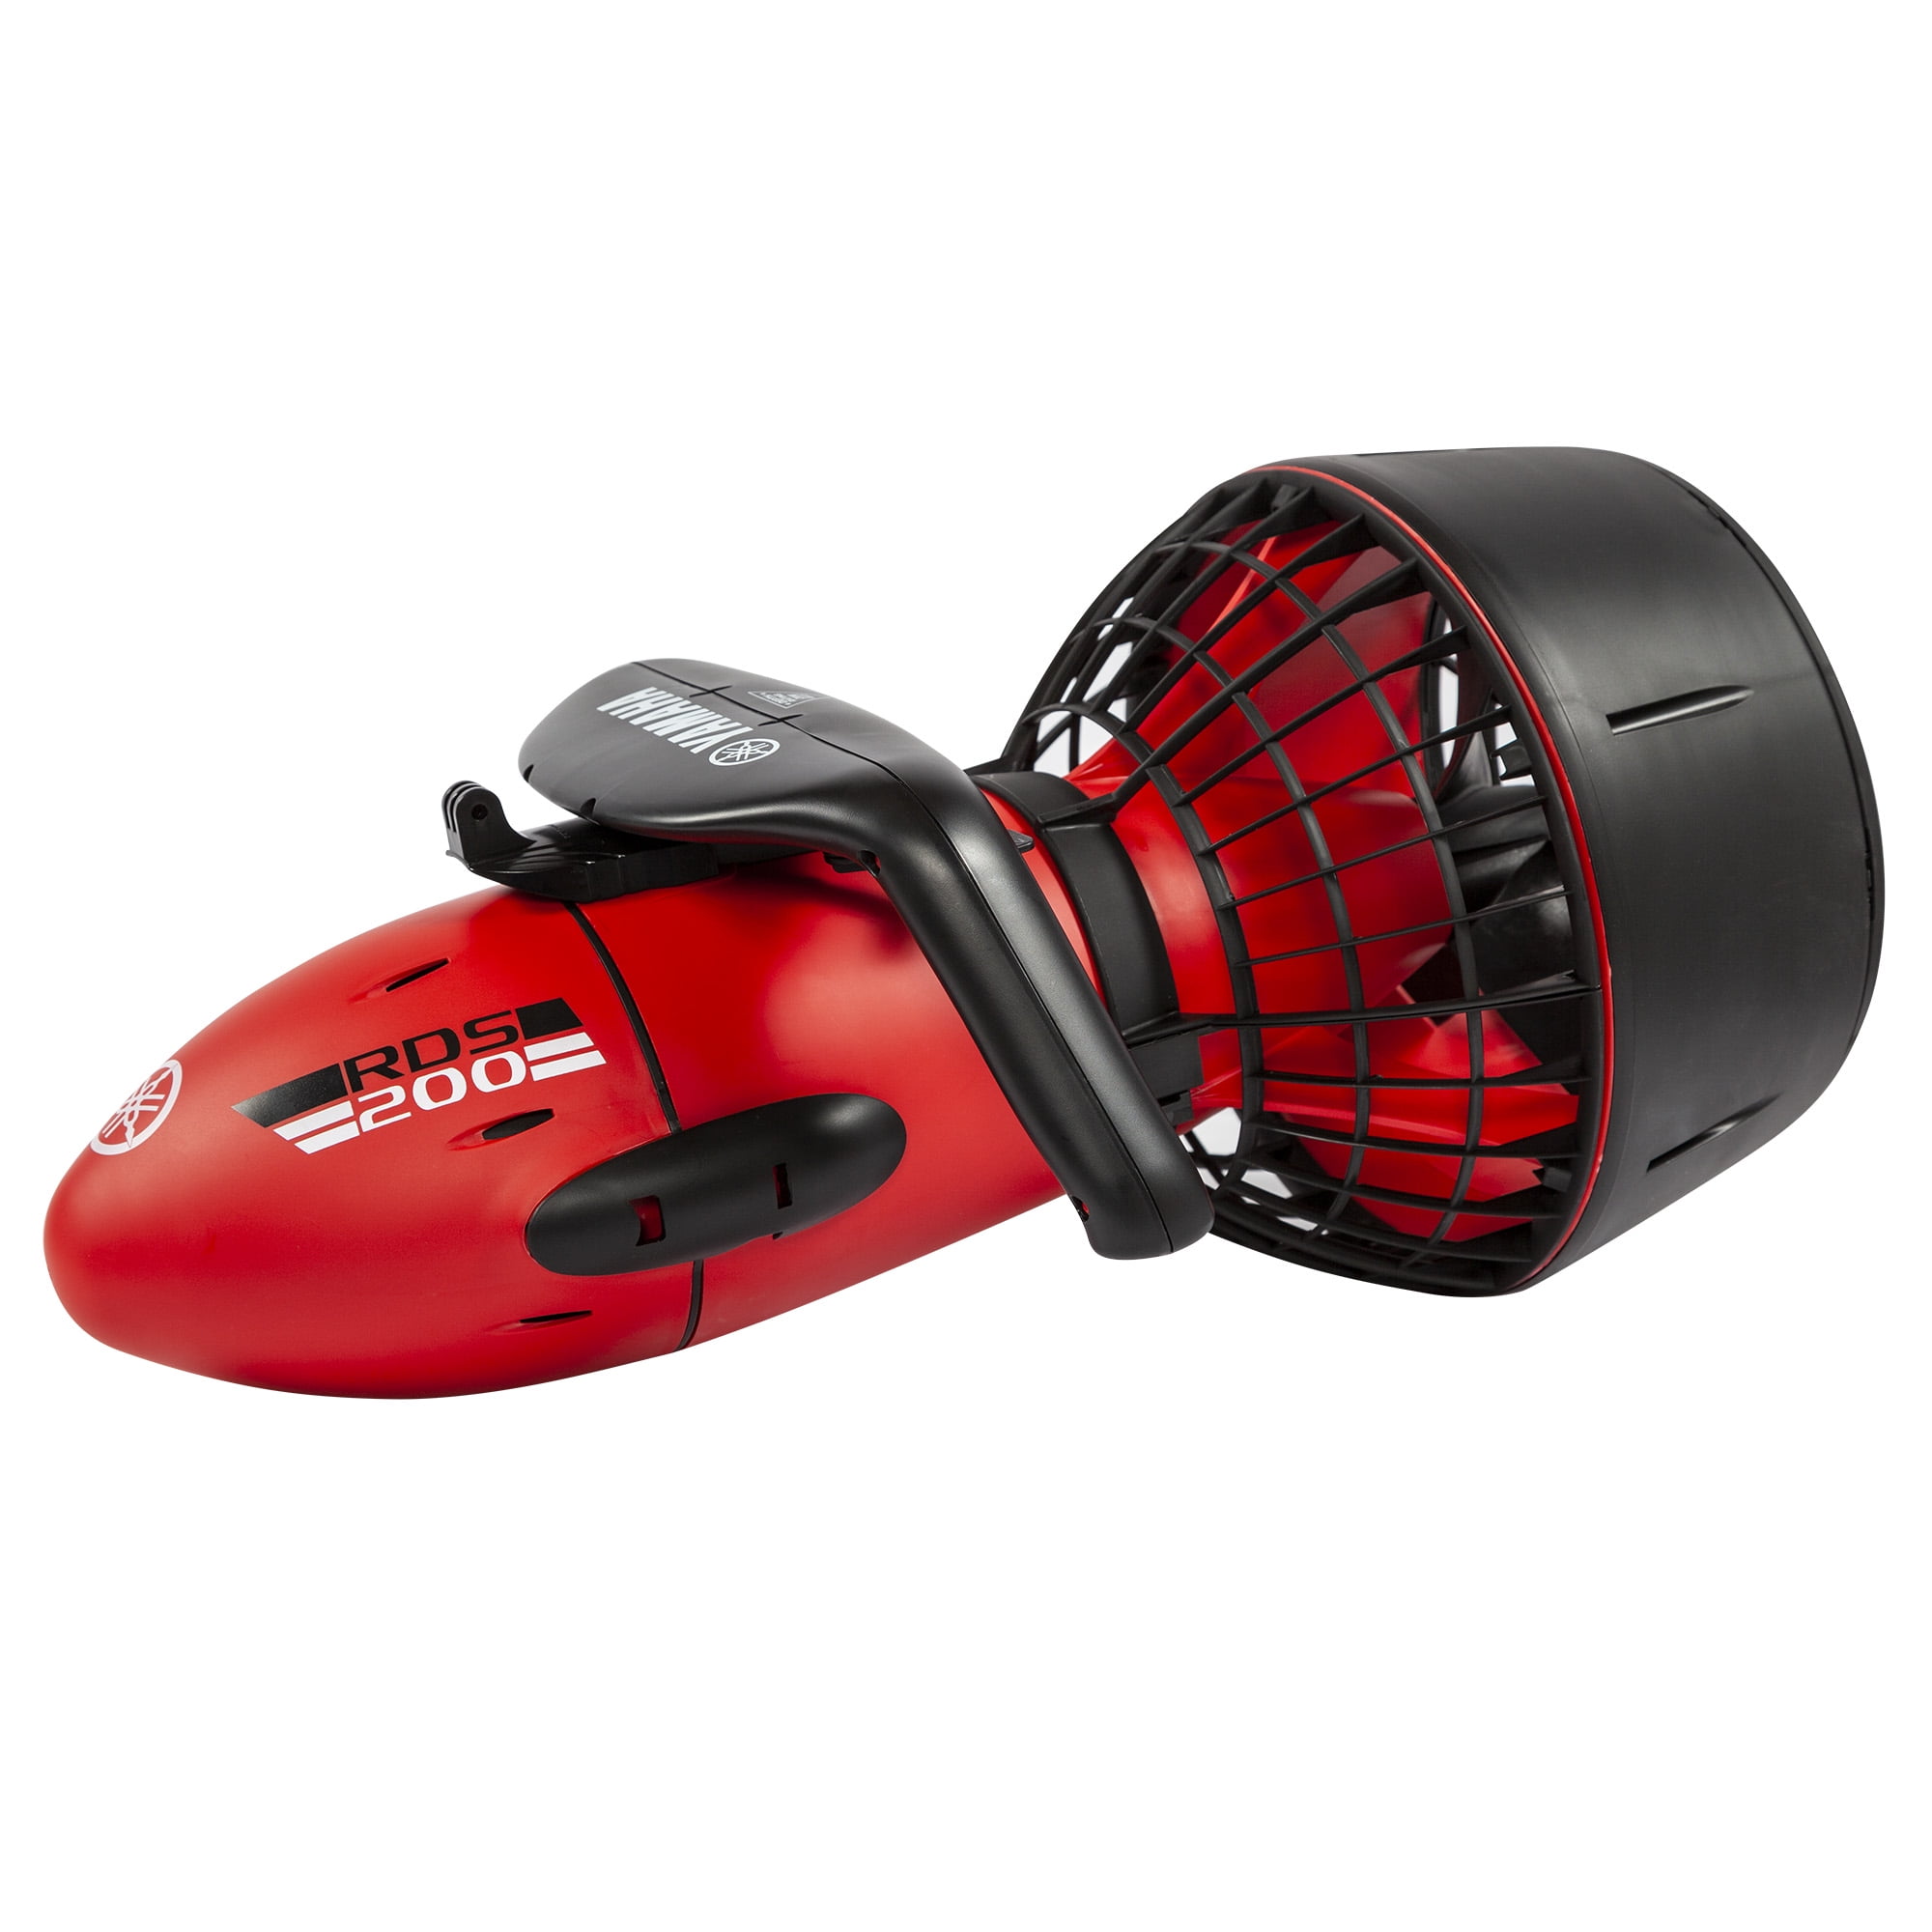 Yamaha YME23200 Recreational Snorkeling Dive RDS200 Underwater